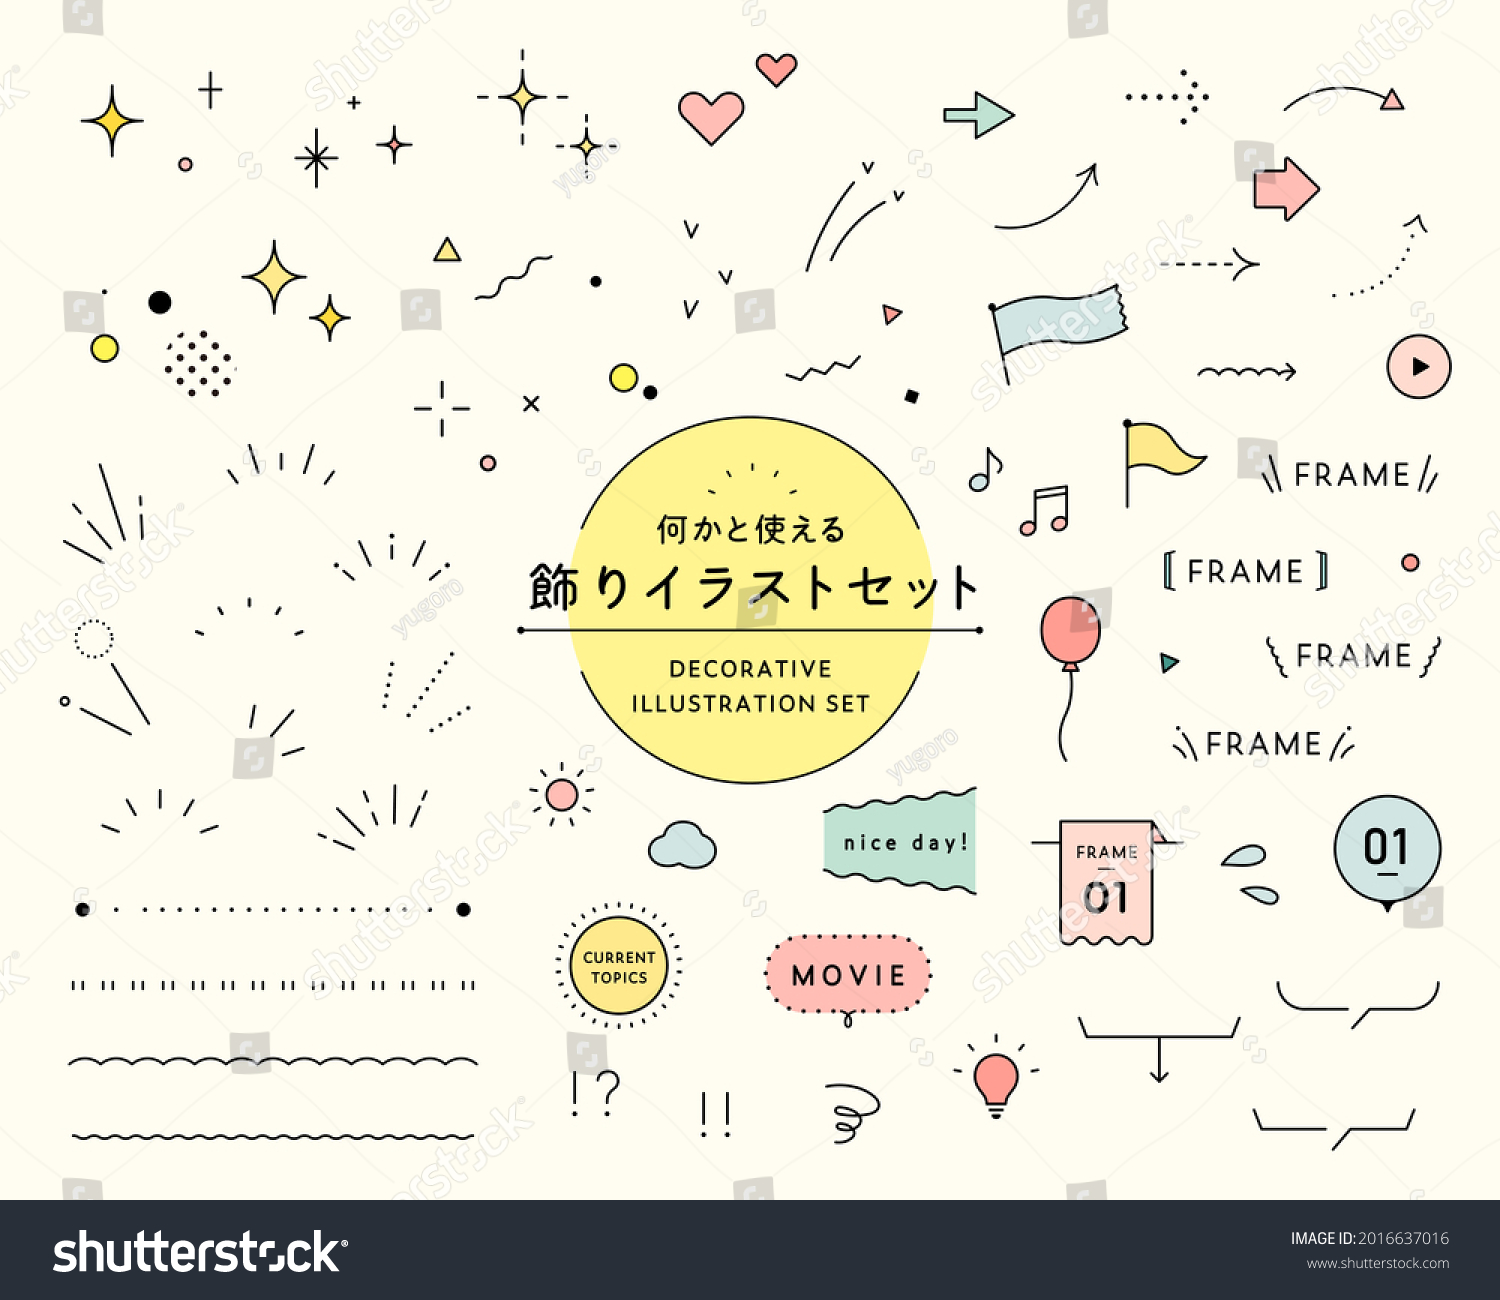 stock-vector-a-set-of-illustrations-and-icons-of-decorations-japanese-means-the-same-as-the-english-title-2016637016